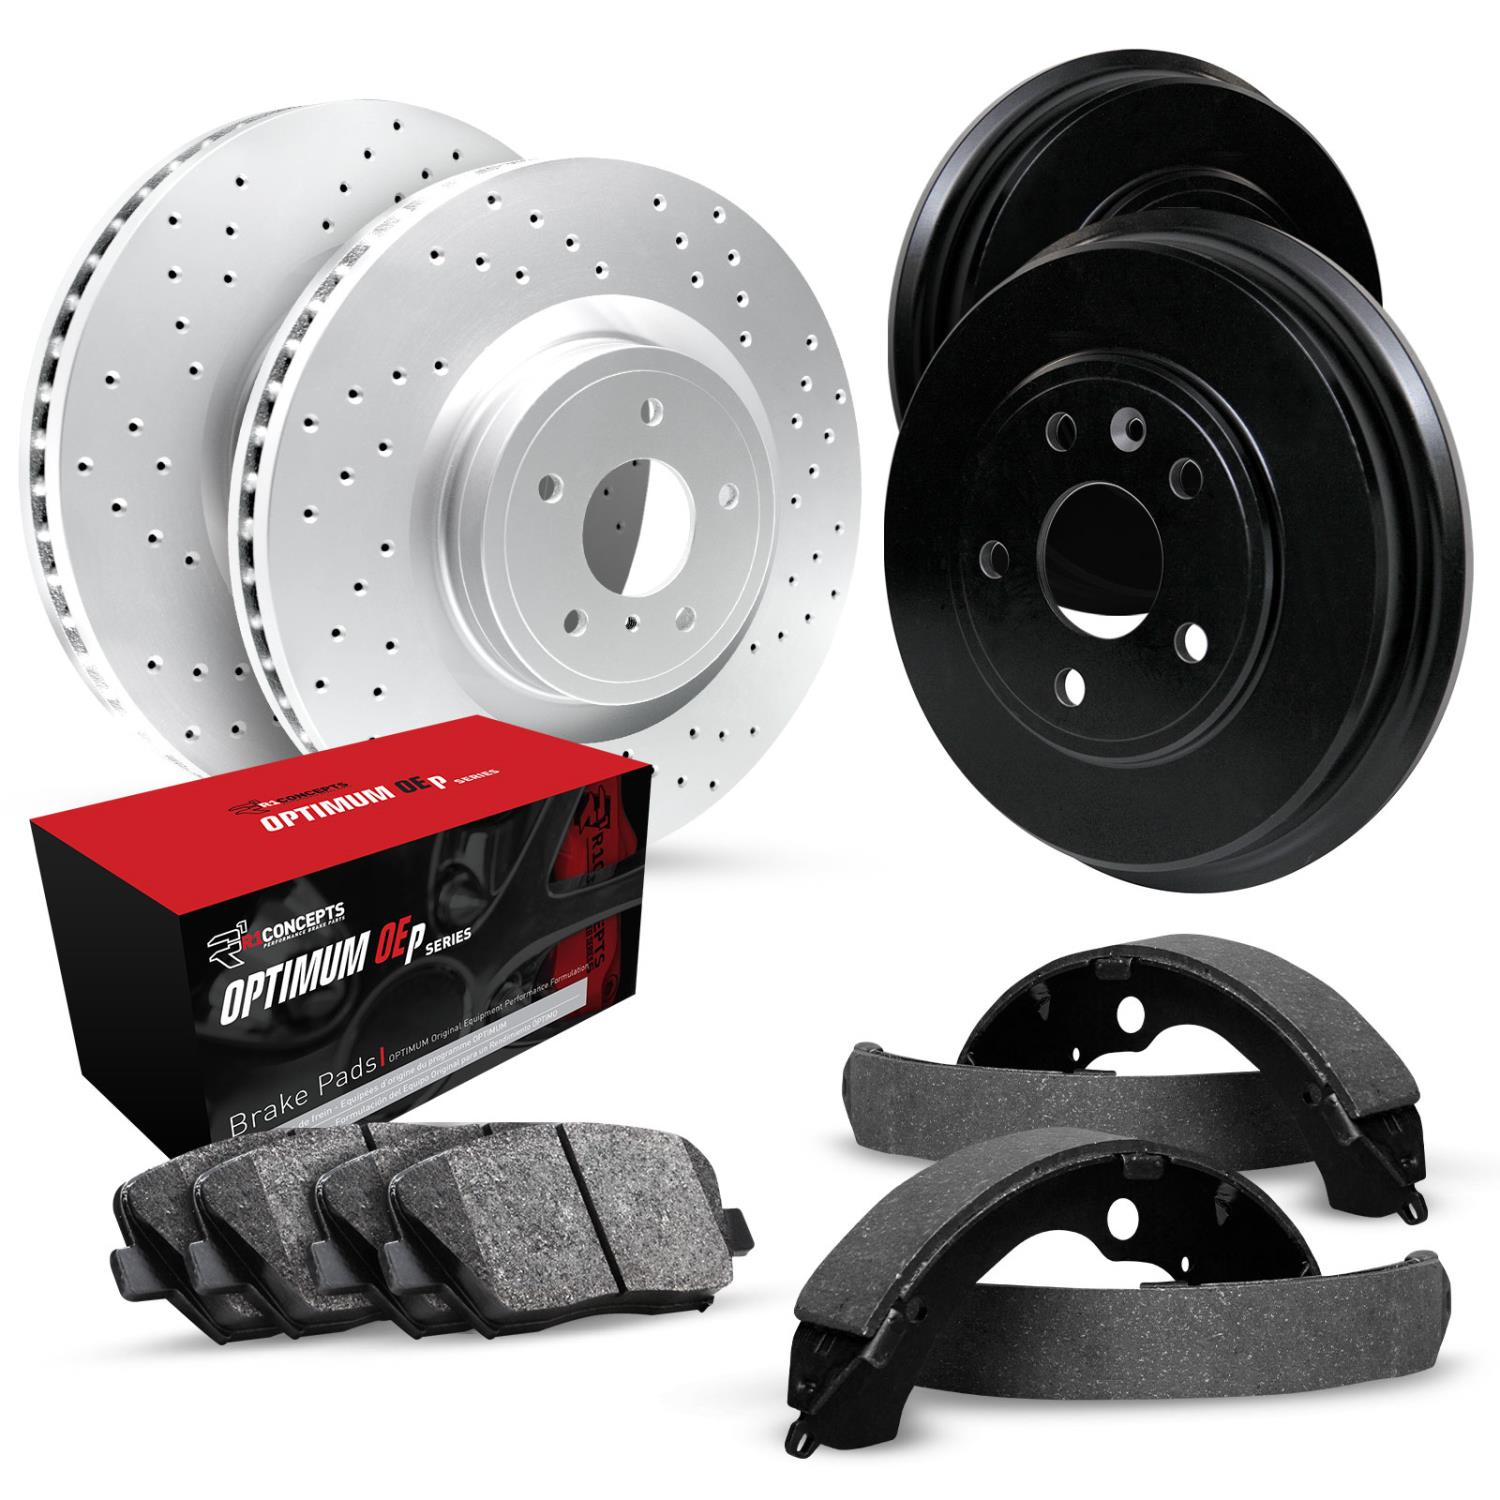 GEO-Carbon Drilled Brake Rotor & Drum Set w/Optimum OE Pads & Shoes, 1991-1998 GM, Position: Front & Rear